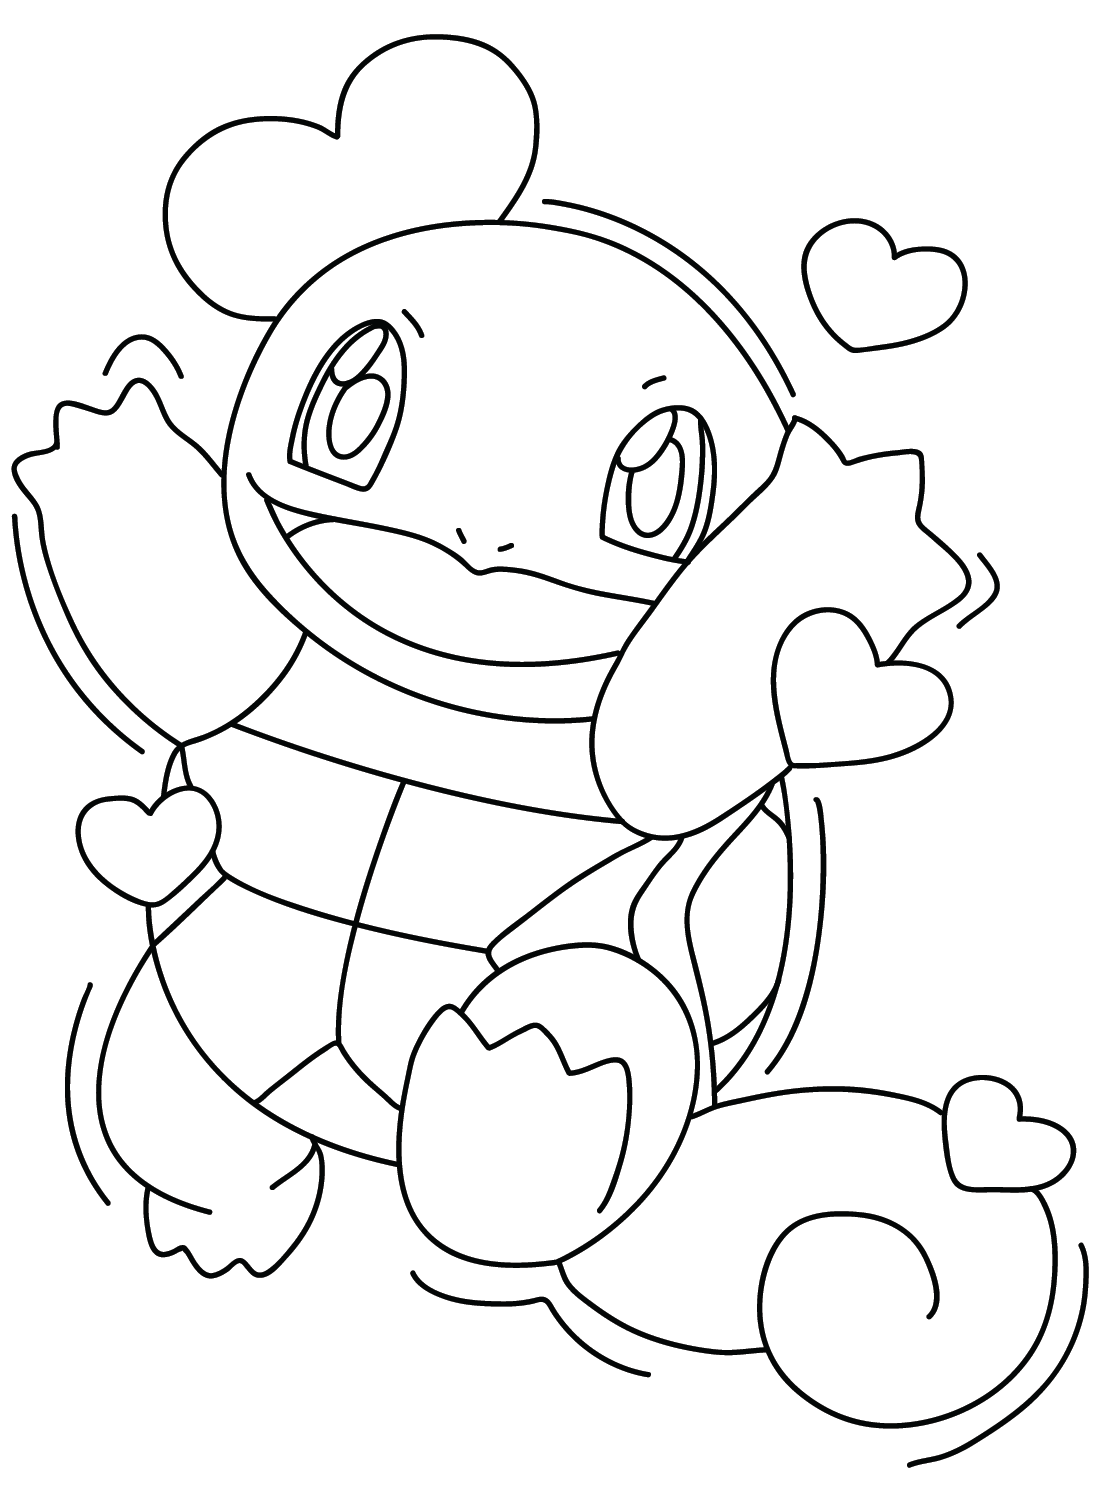 Squirtle Printable Coloring Page from Squirtle